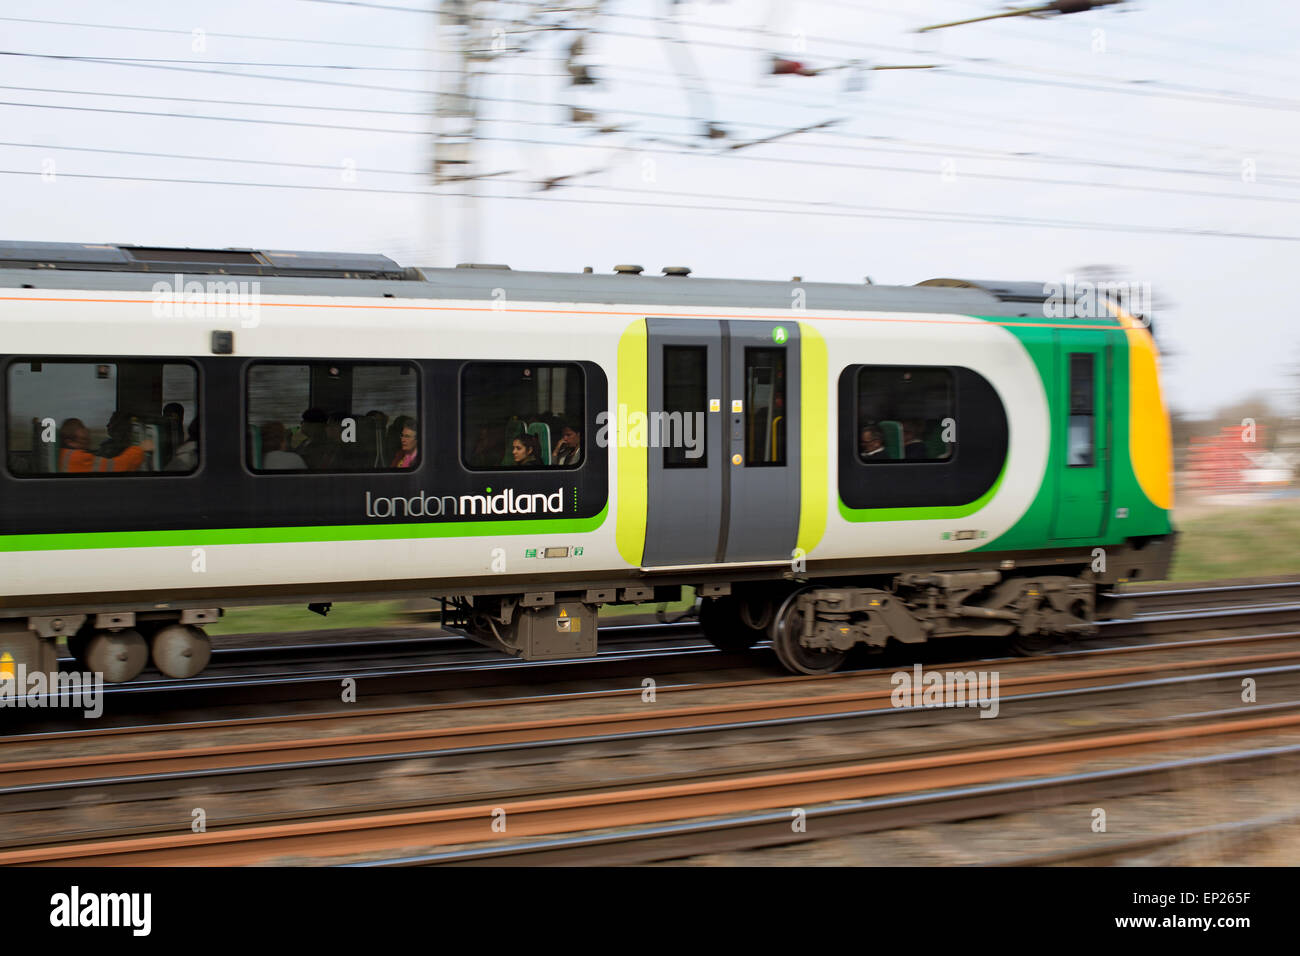 A London Midland commuter train in motion Stock Photo